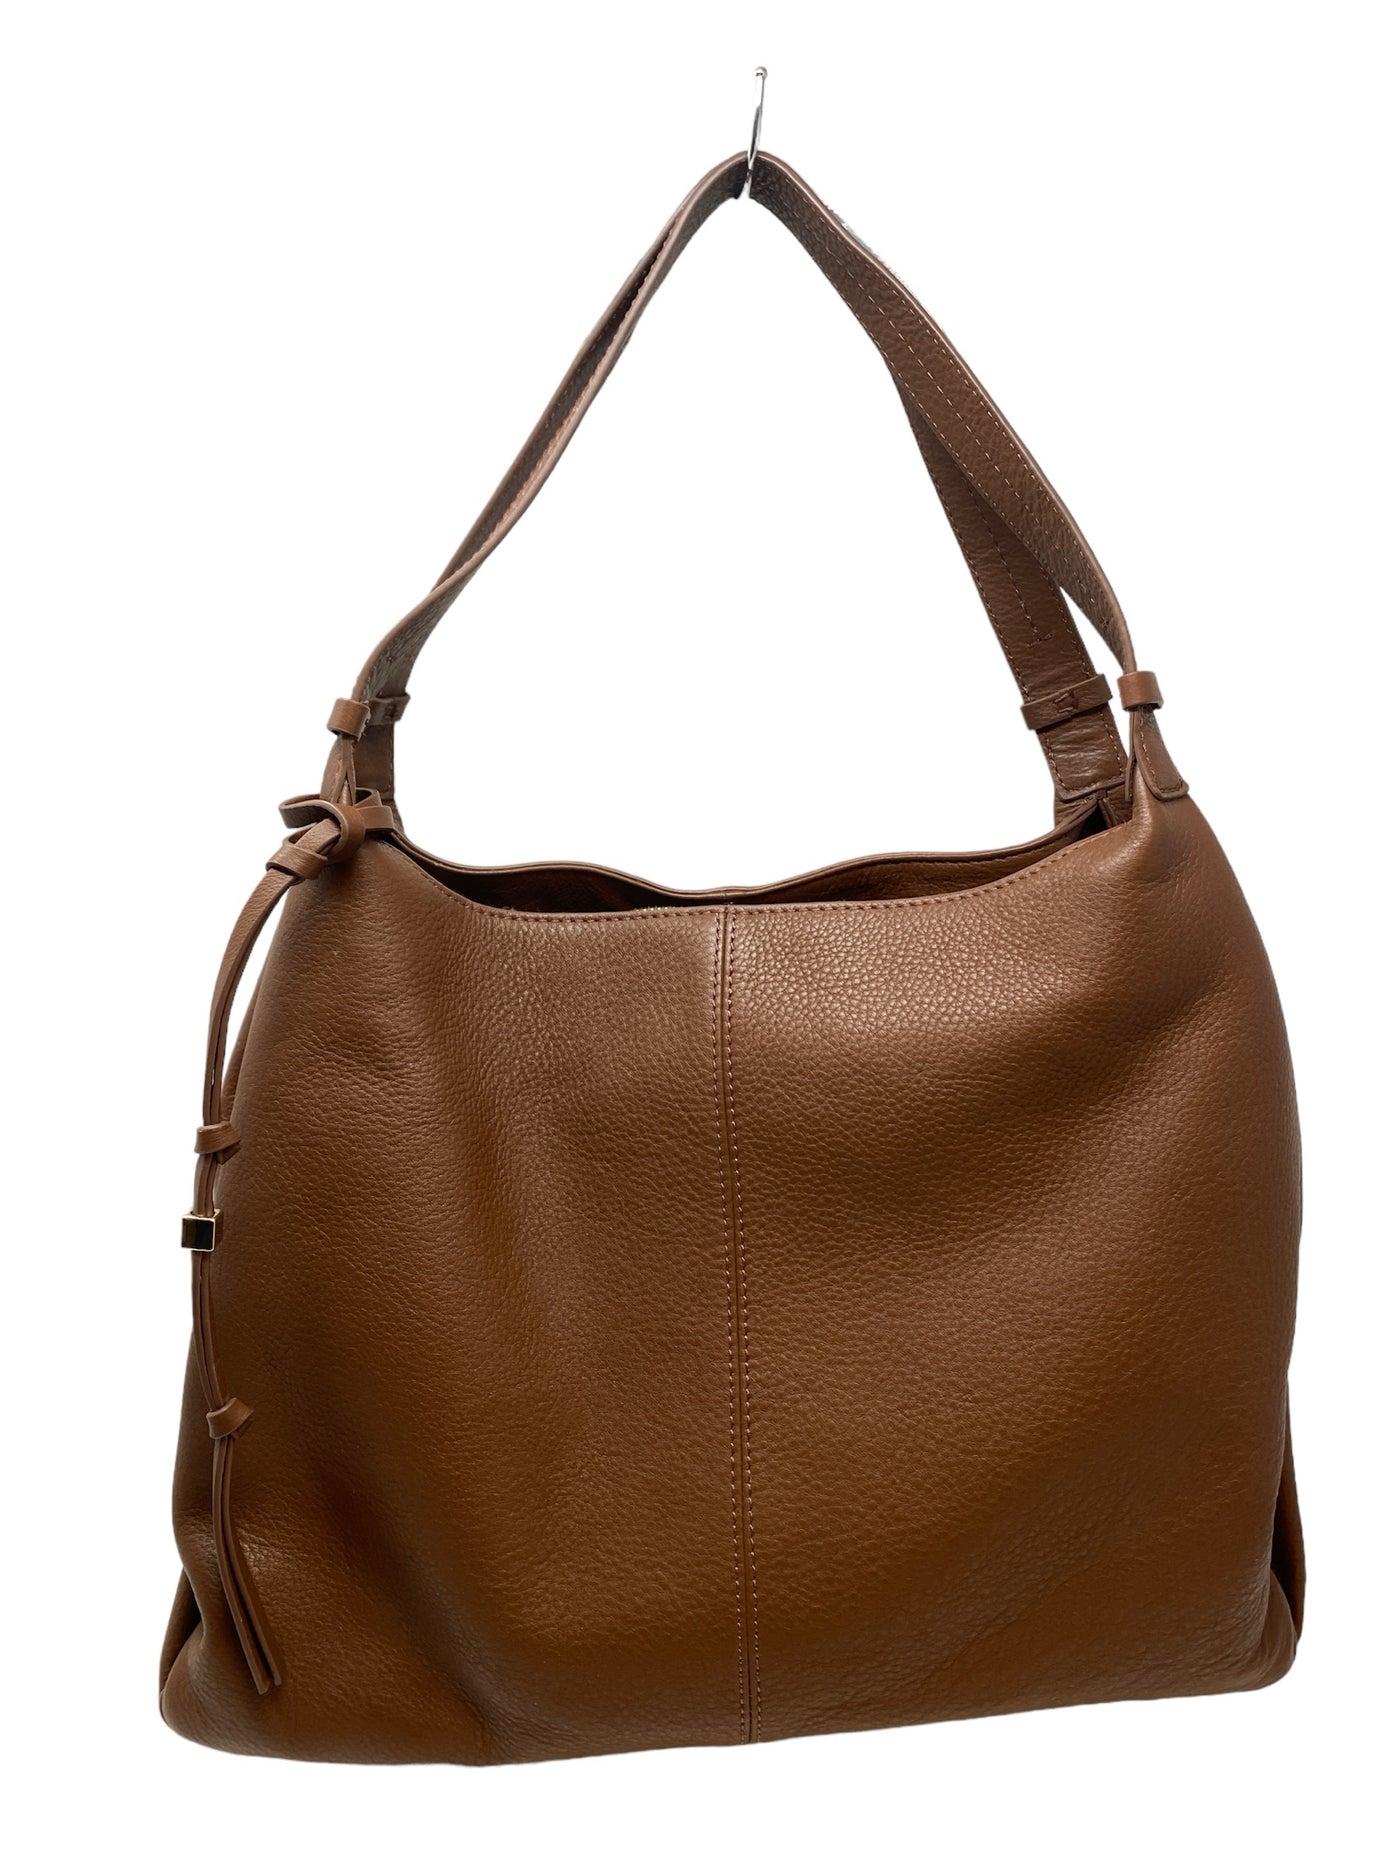 Vince Camuto Brown Purse